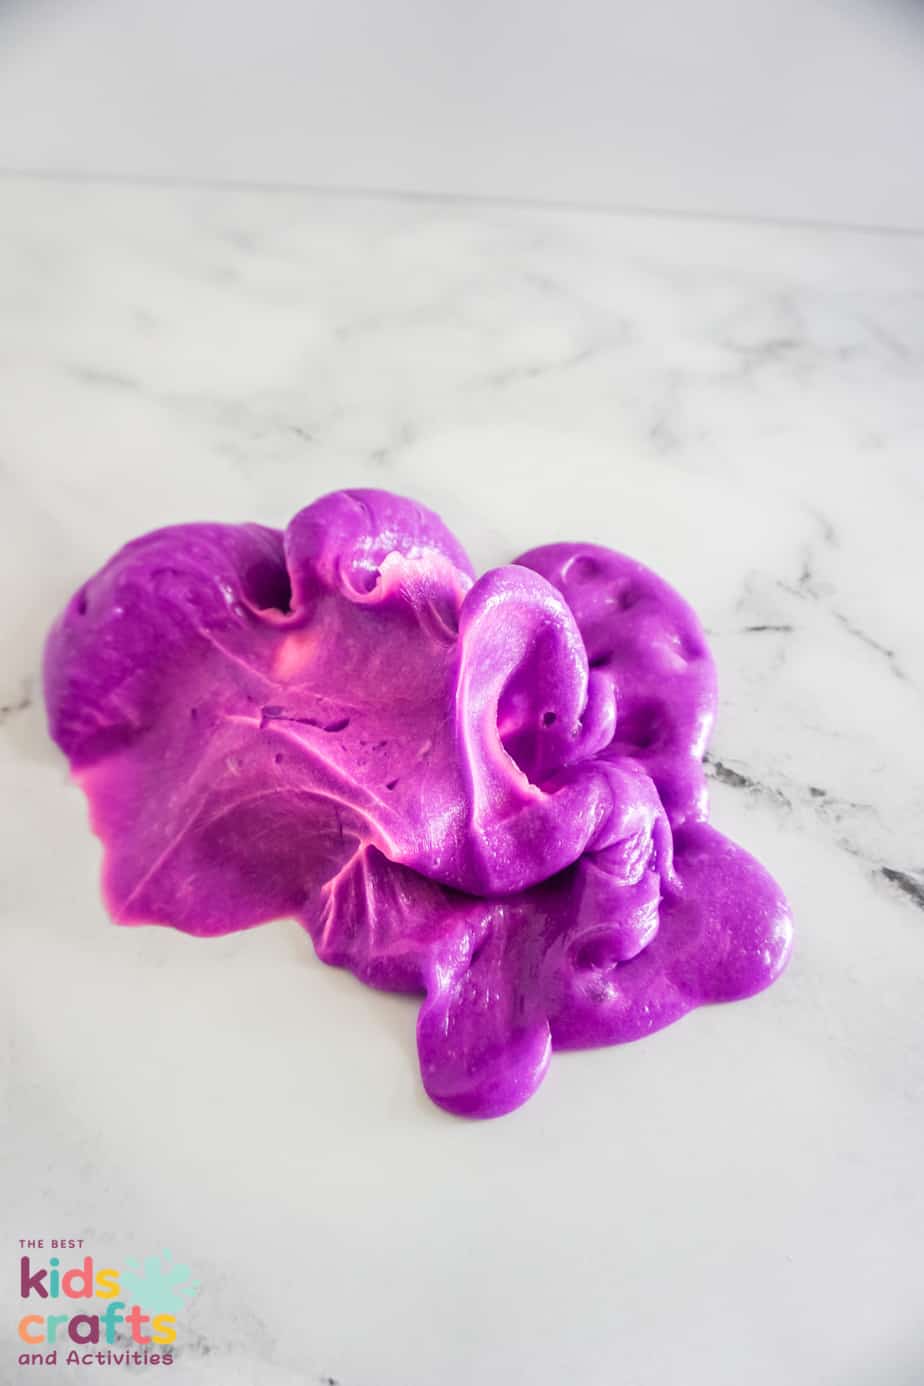 HOW TO MAKE COLOR-CHANGING SLIME 